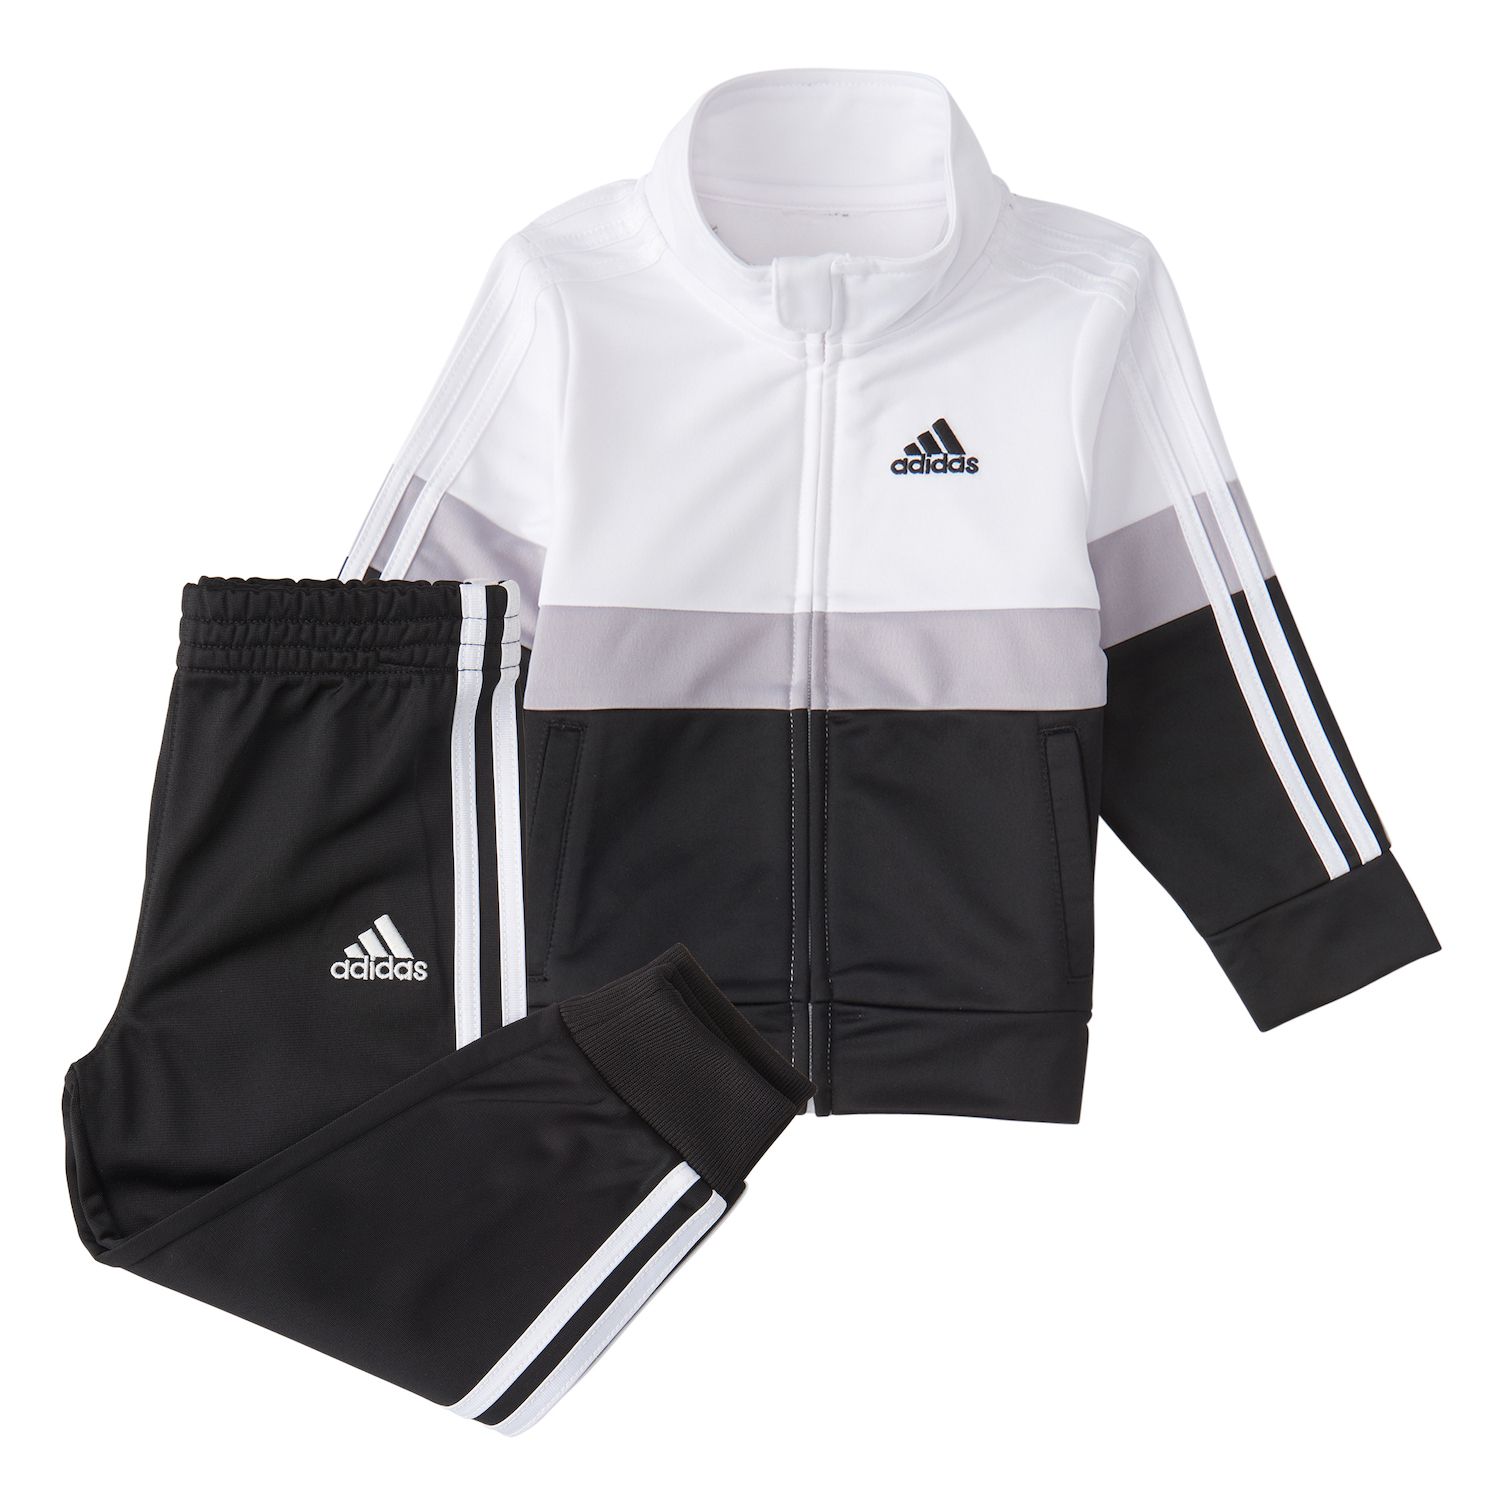 adidas outfit baby boy